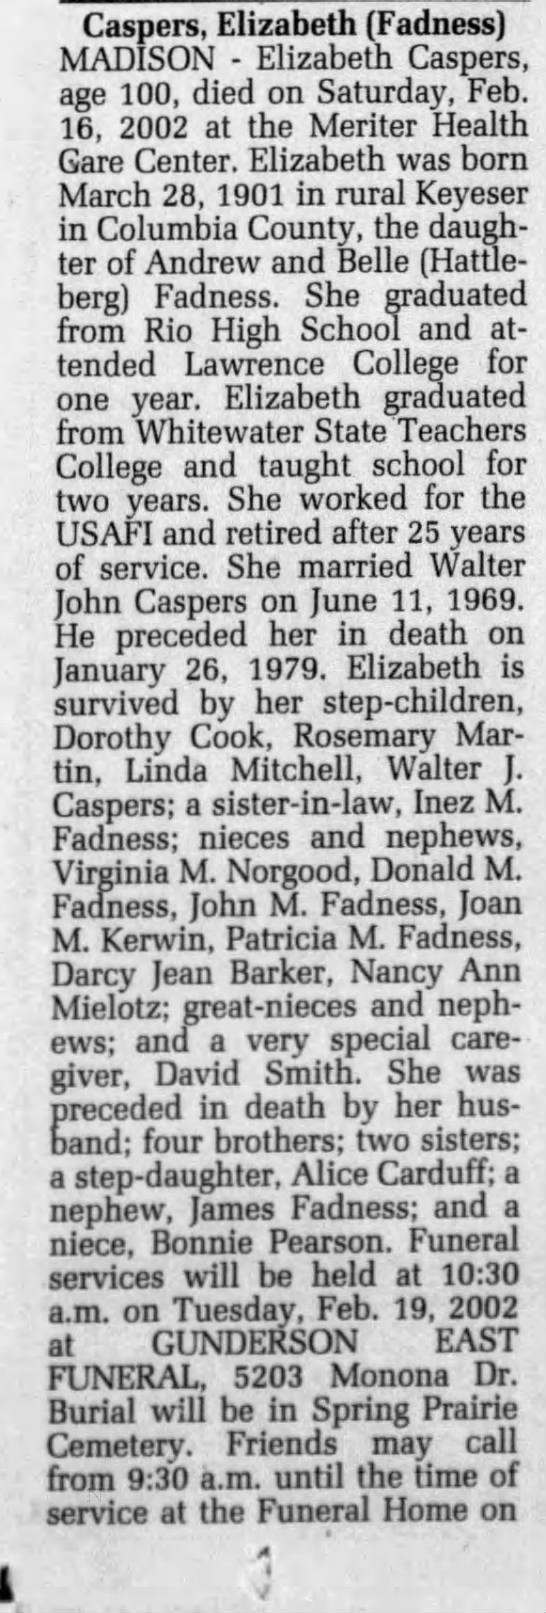 Obituary for Elizabeth Caspers, 1901-2002 (Aged 100) - 